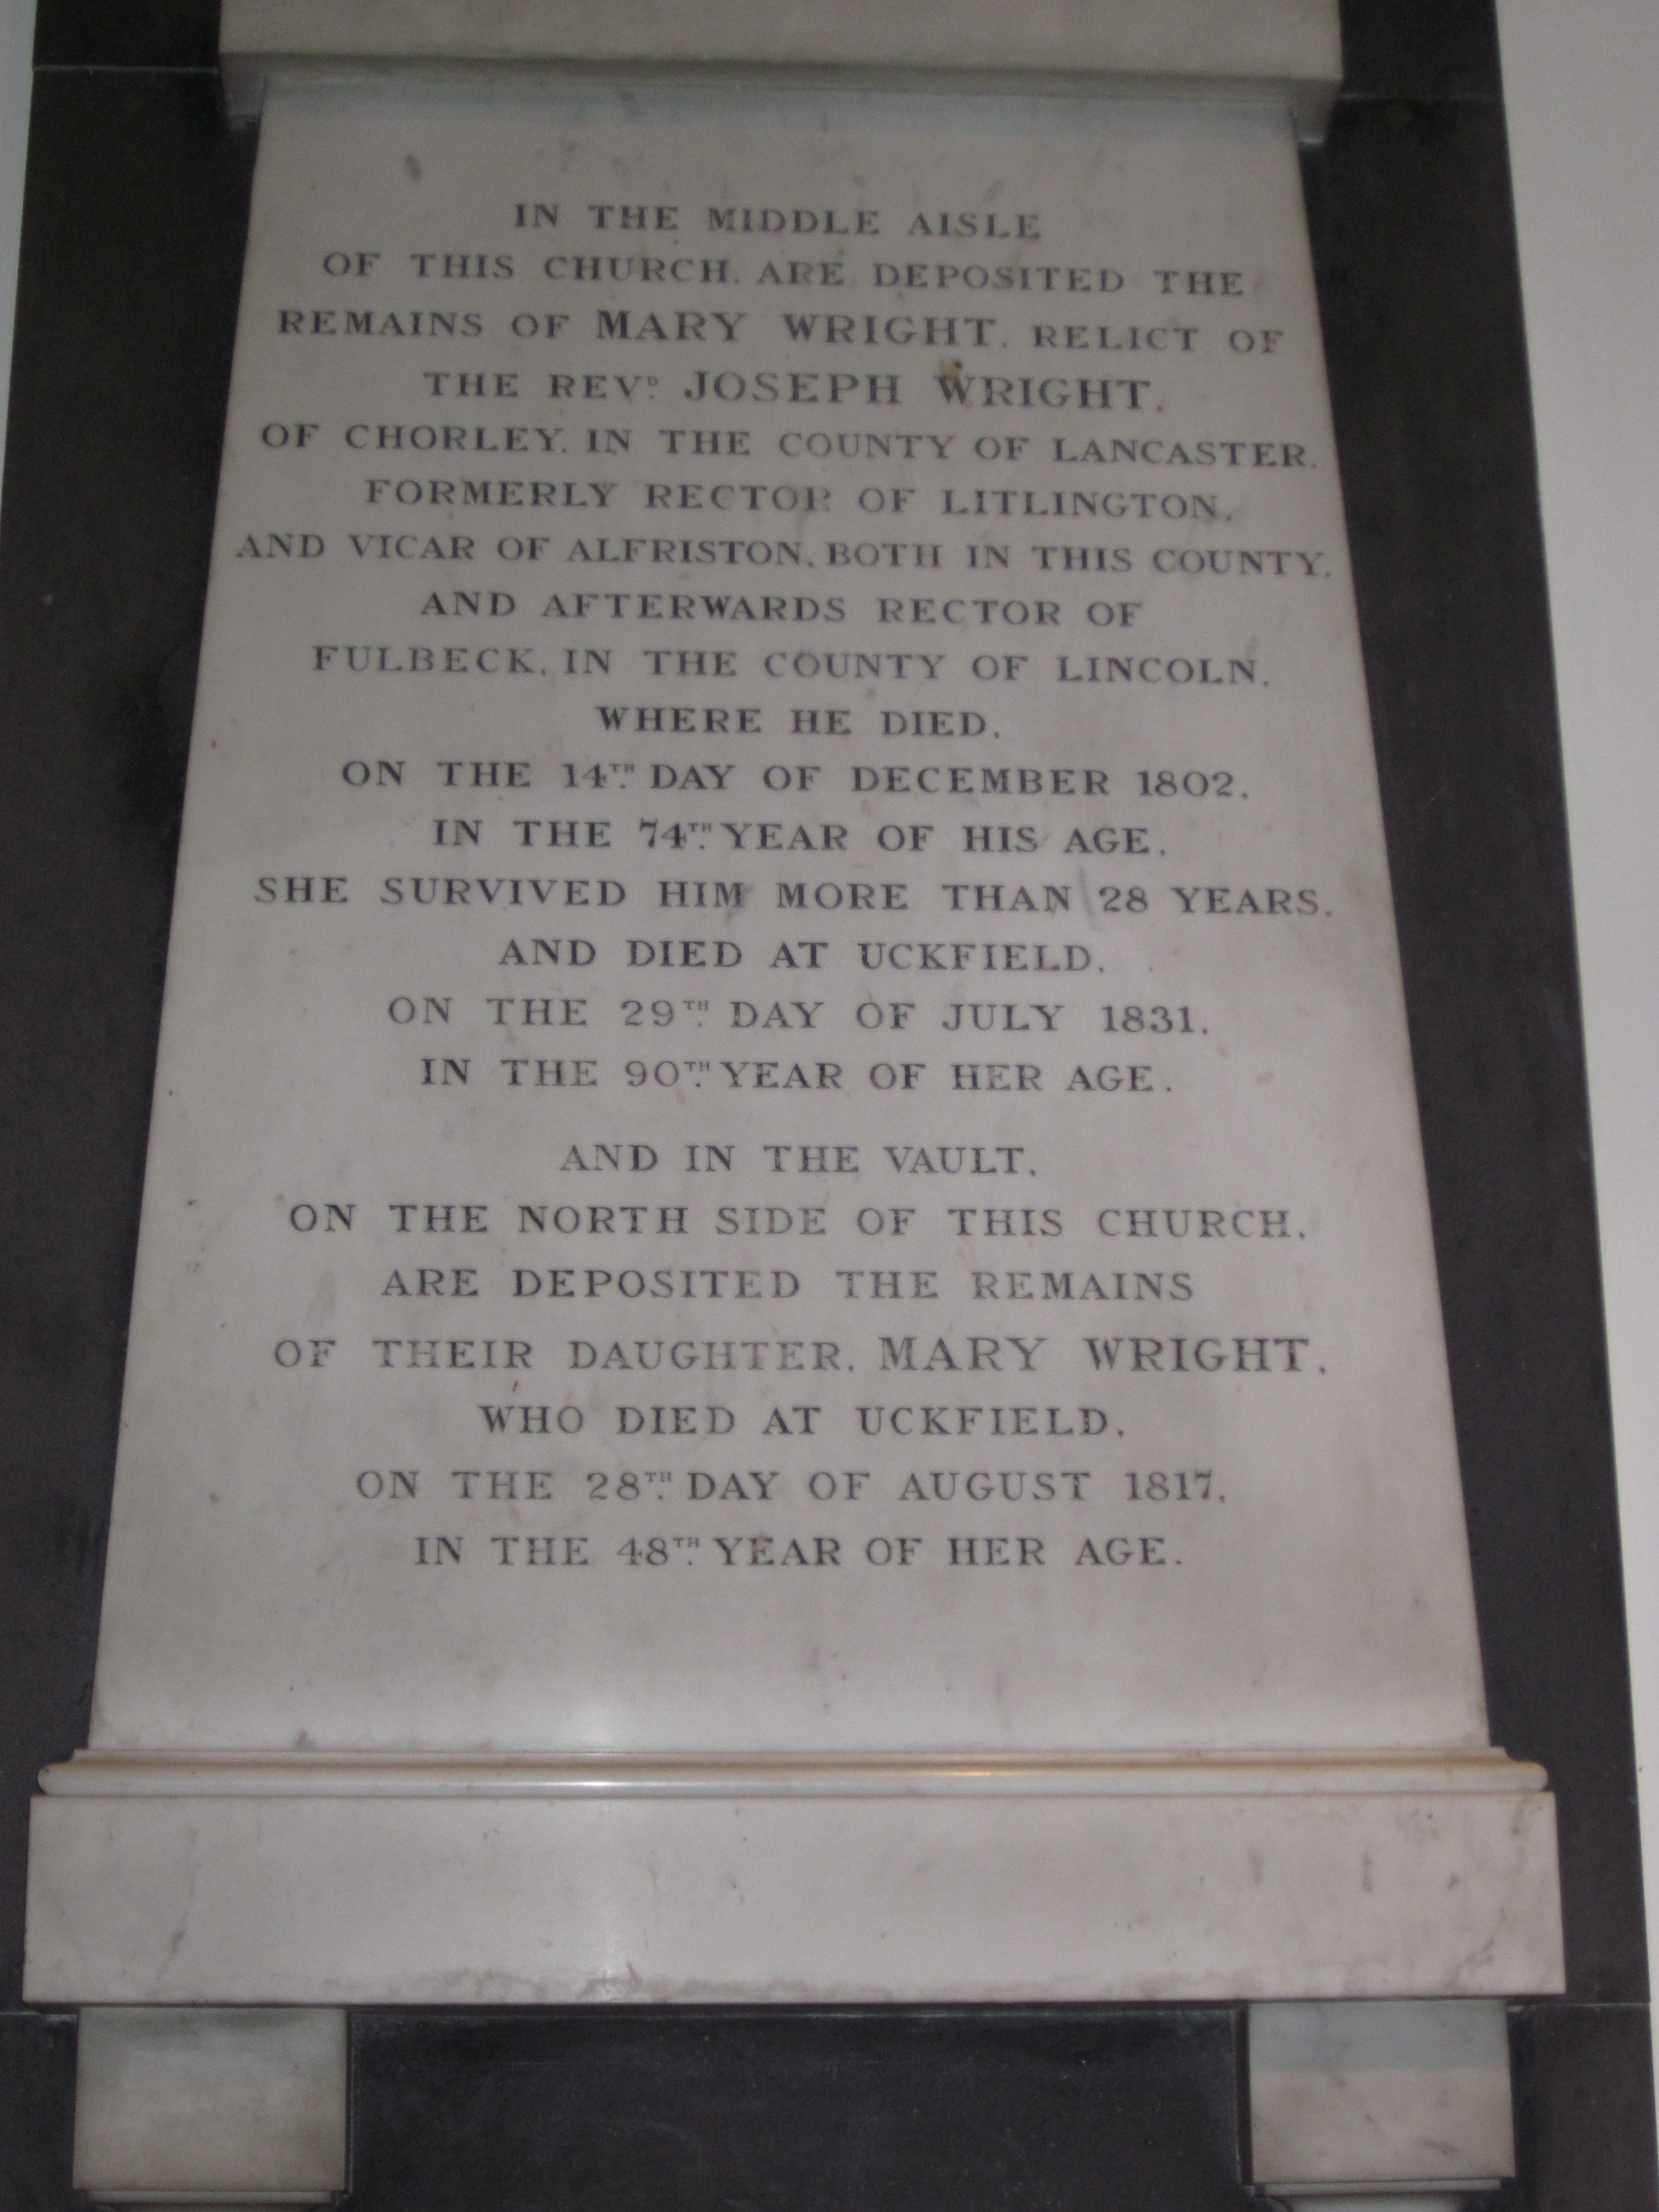 "In the middle aisle of this church are deposited the remains of Mary Wright relict of the Revd Joseph Wright of Chorley in the County of Lancaster formerly Rector of Litlington and Vicar of Alfriston both in thisd County and afterwards Rector of Fulbeck in the County of Lincoln where he died on the 14th Day of December 1802 in the 74th year of his age. She survived him more than 28 years and died at Uckfield on the 29th day of July 1831 in the 90th year of her age.